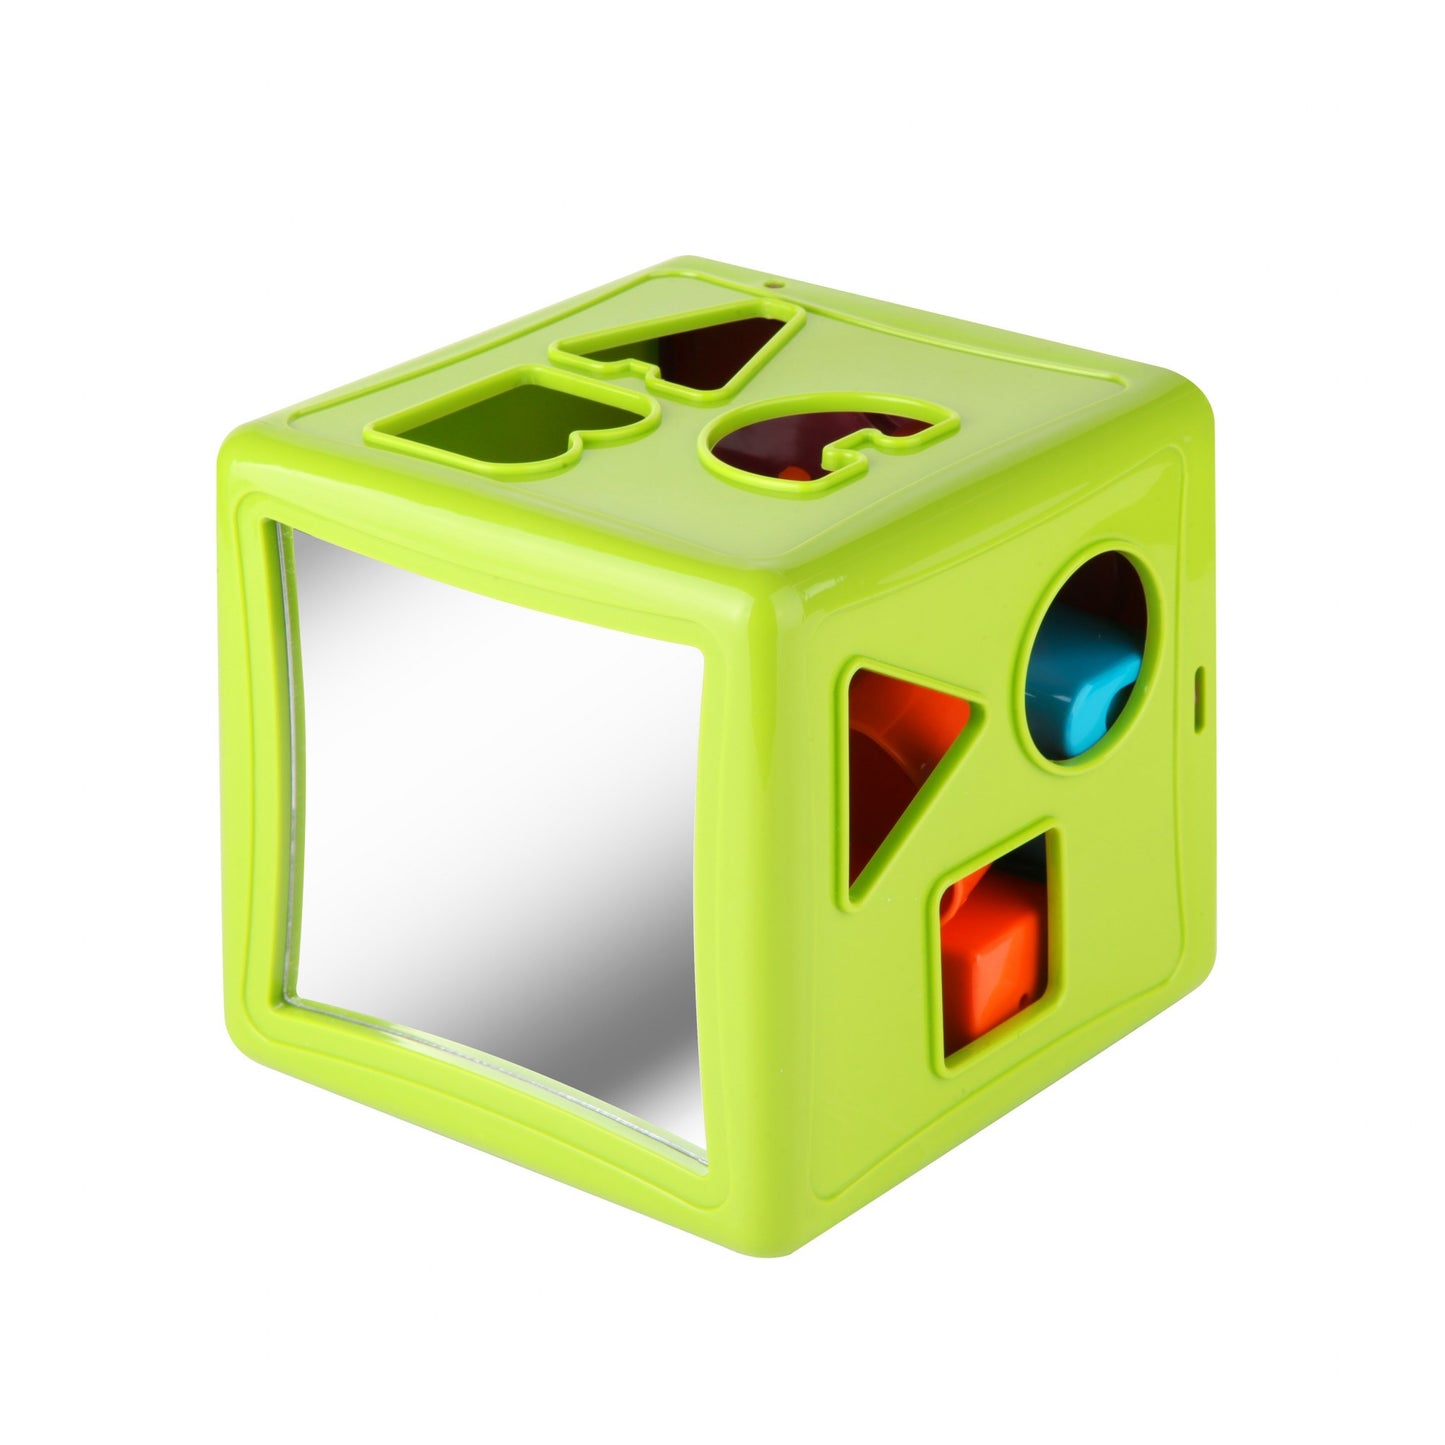 Shape Sorter and Activity Cube